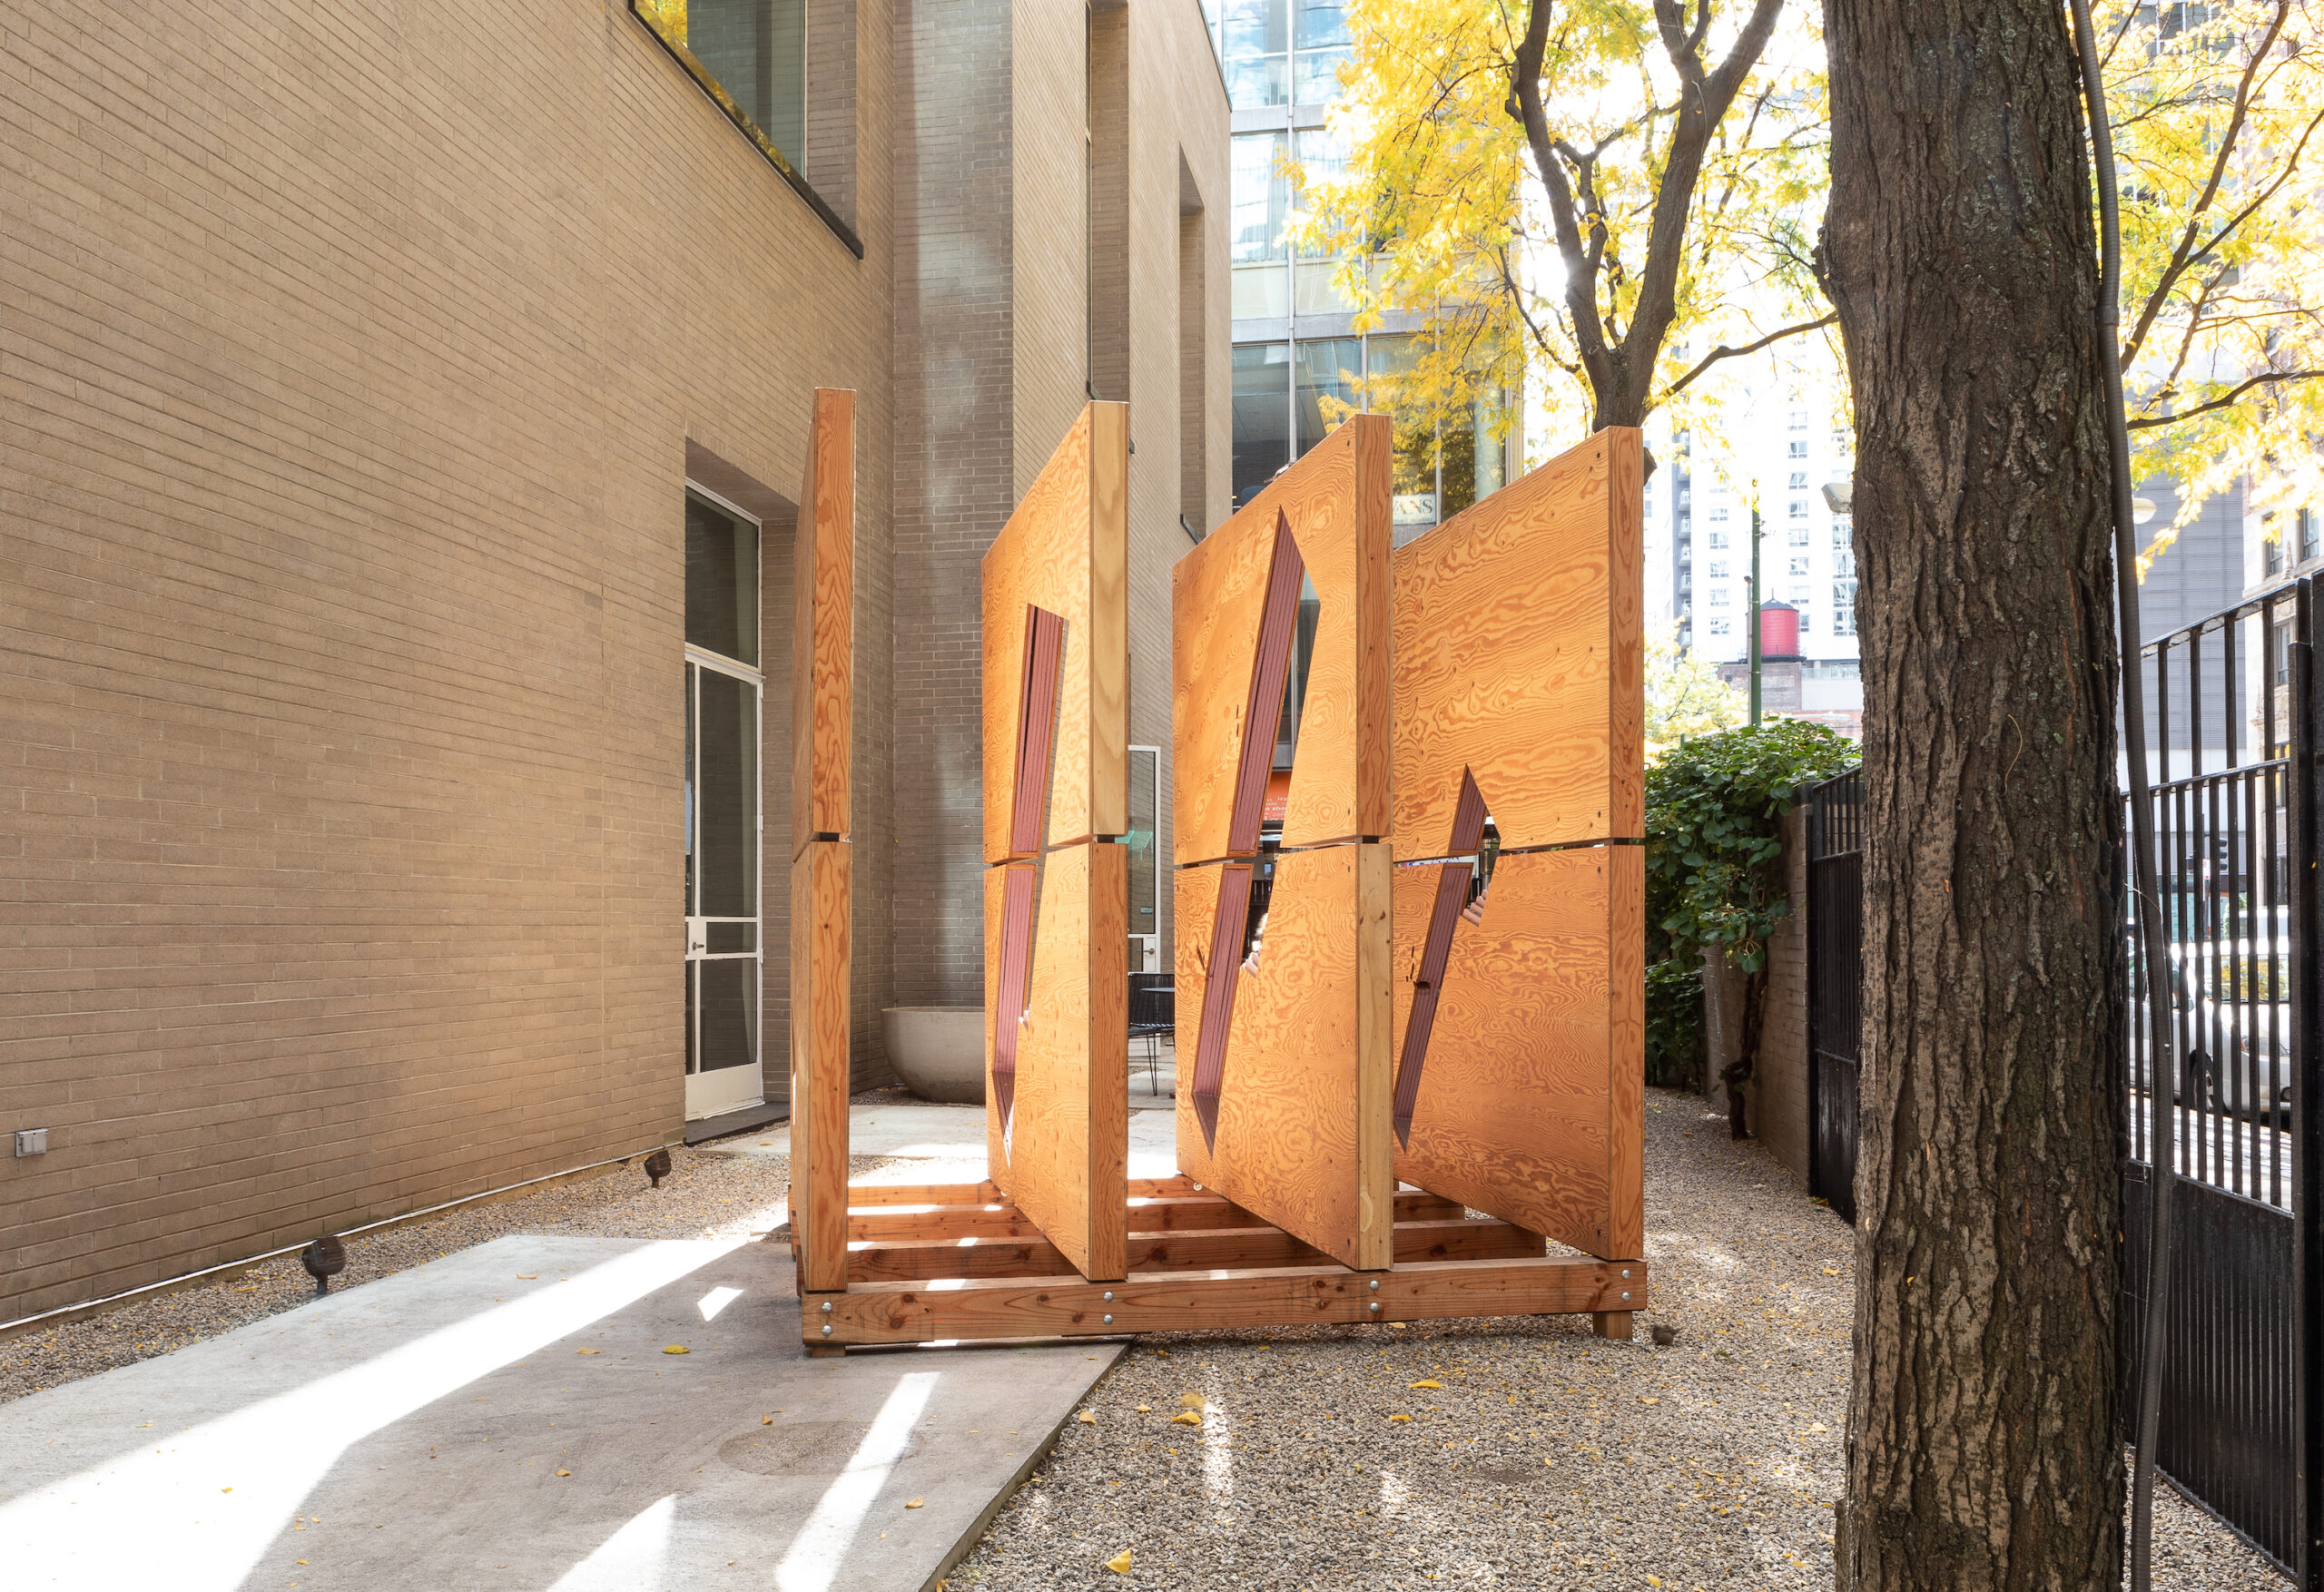 Four wood slabs resembling walls of a crate viewed from the side installed on a wood pallet on the concrete patio of a garden. To their left, the brick exterior of The Arts Club of Chicago is visible.